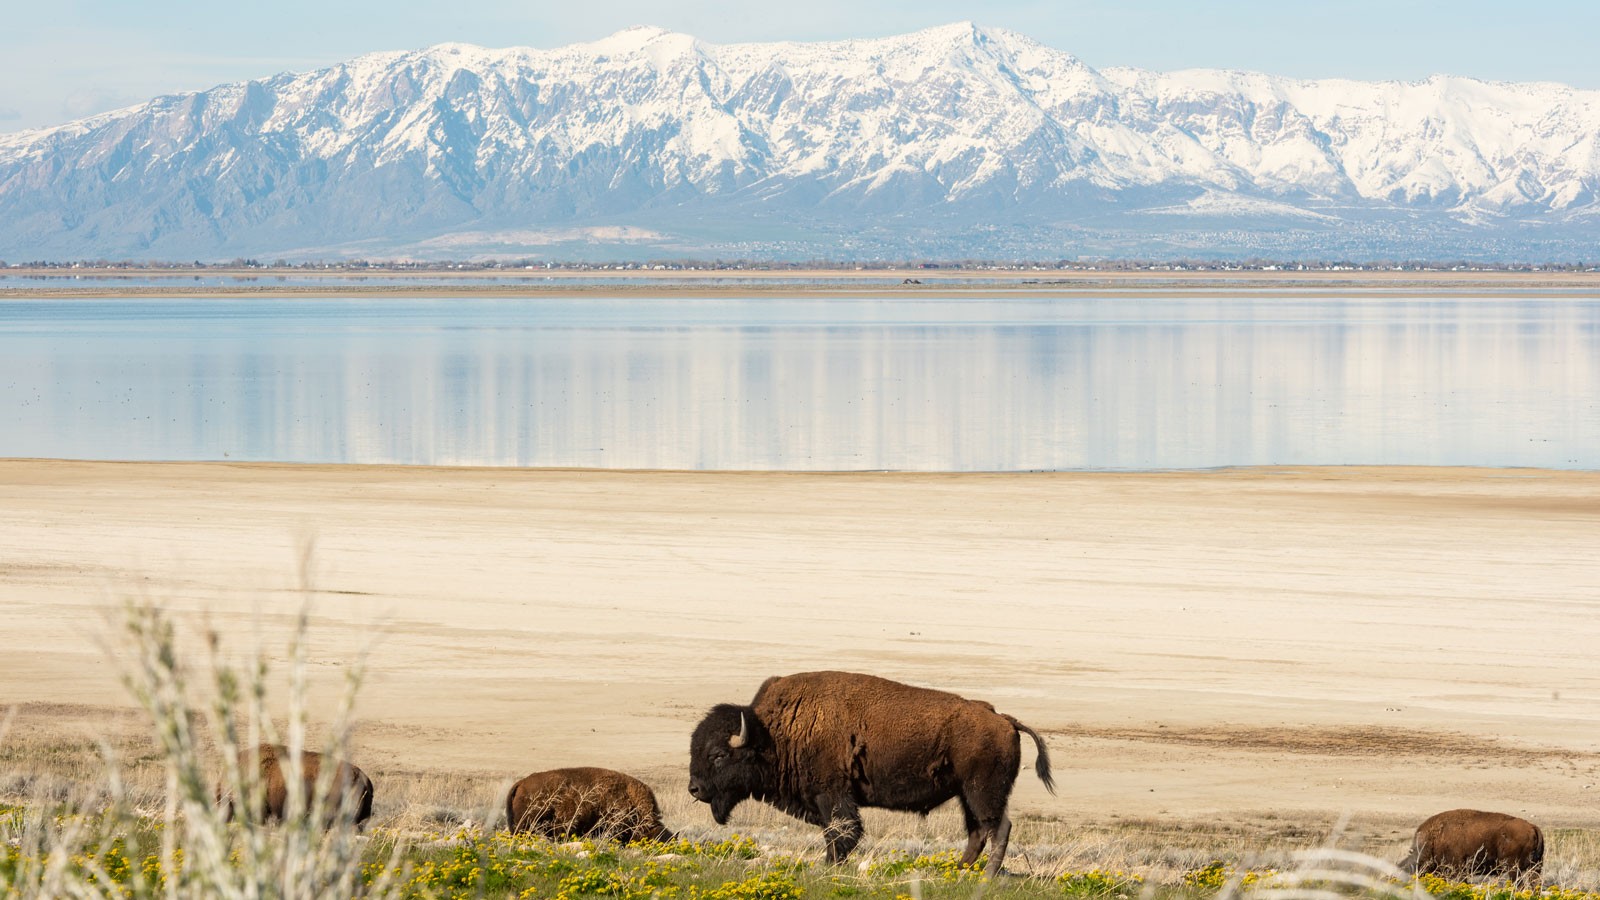 Bison standing on the beach next to the Great Salt Lake